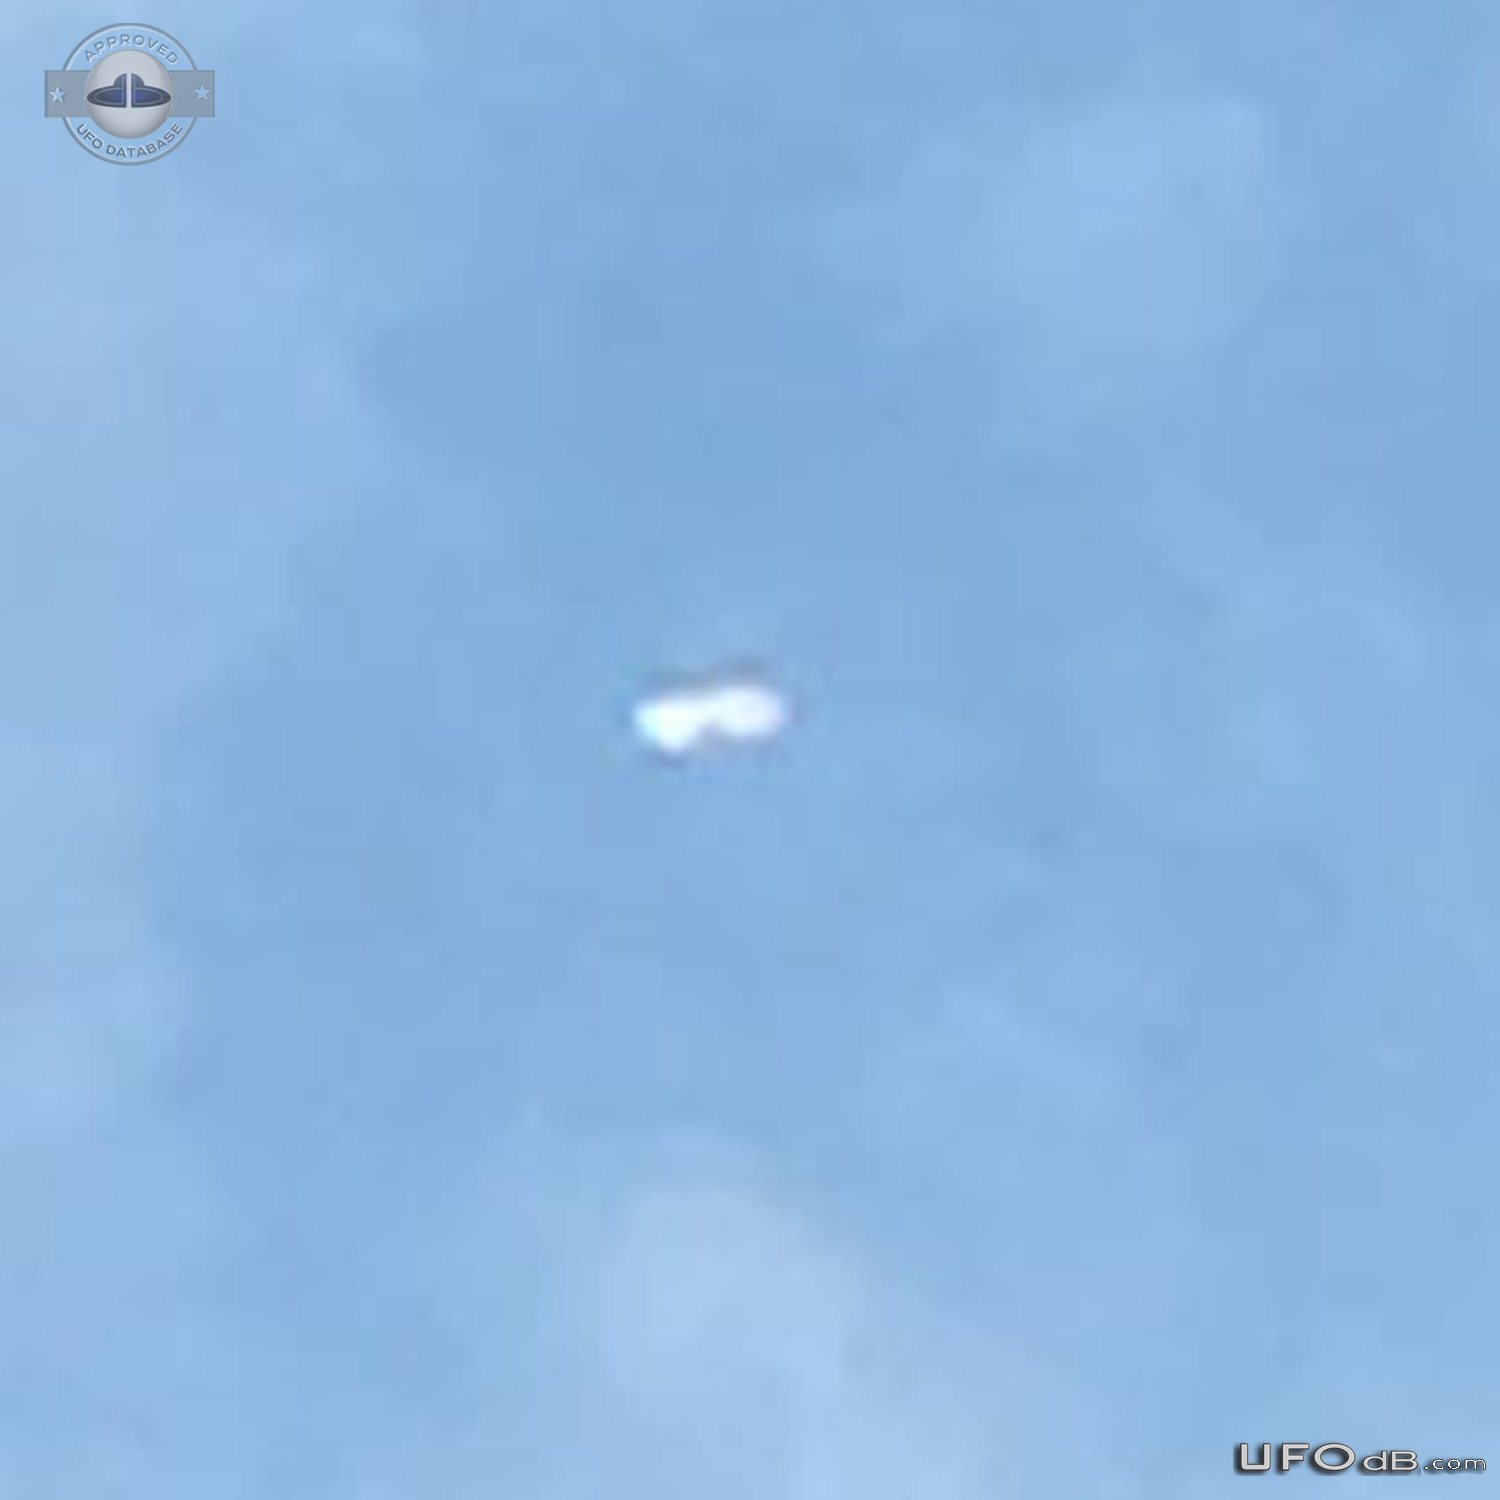 I saw a shiny cigar shaped Ufo in descent through the clouds - Tenness UFO Picture #795-4